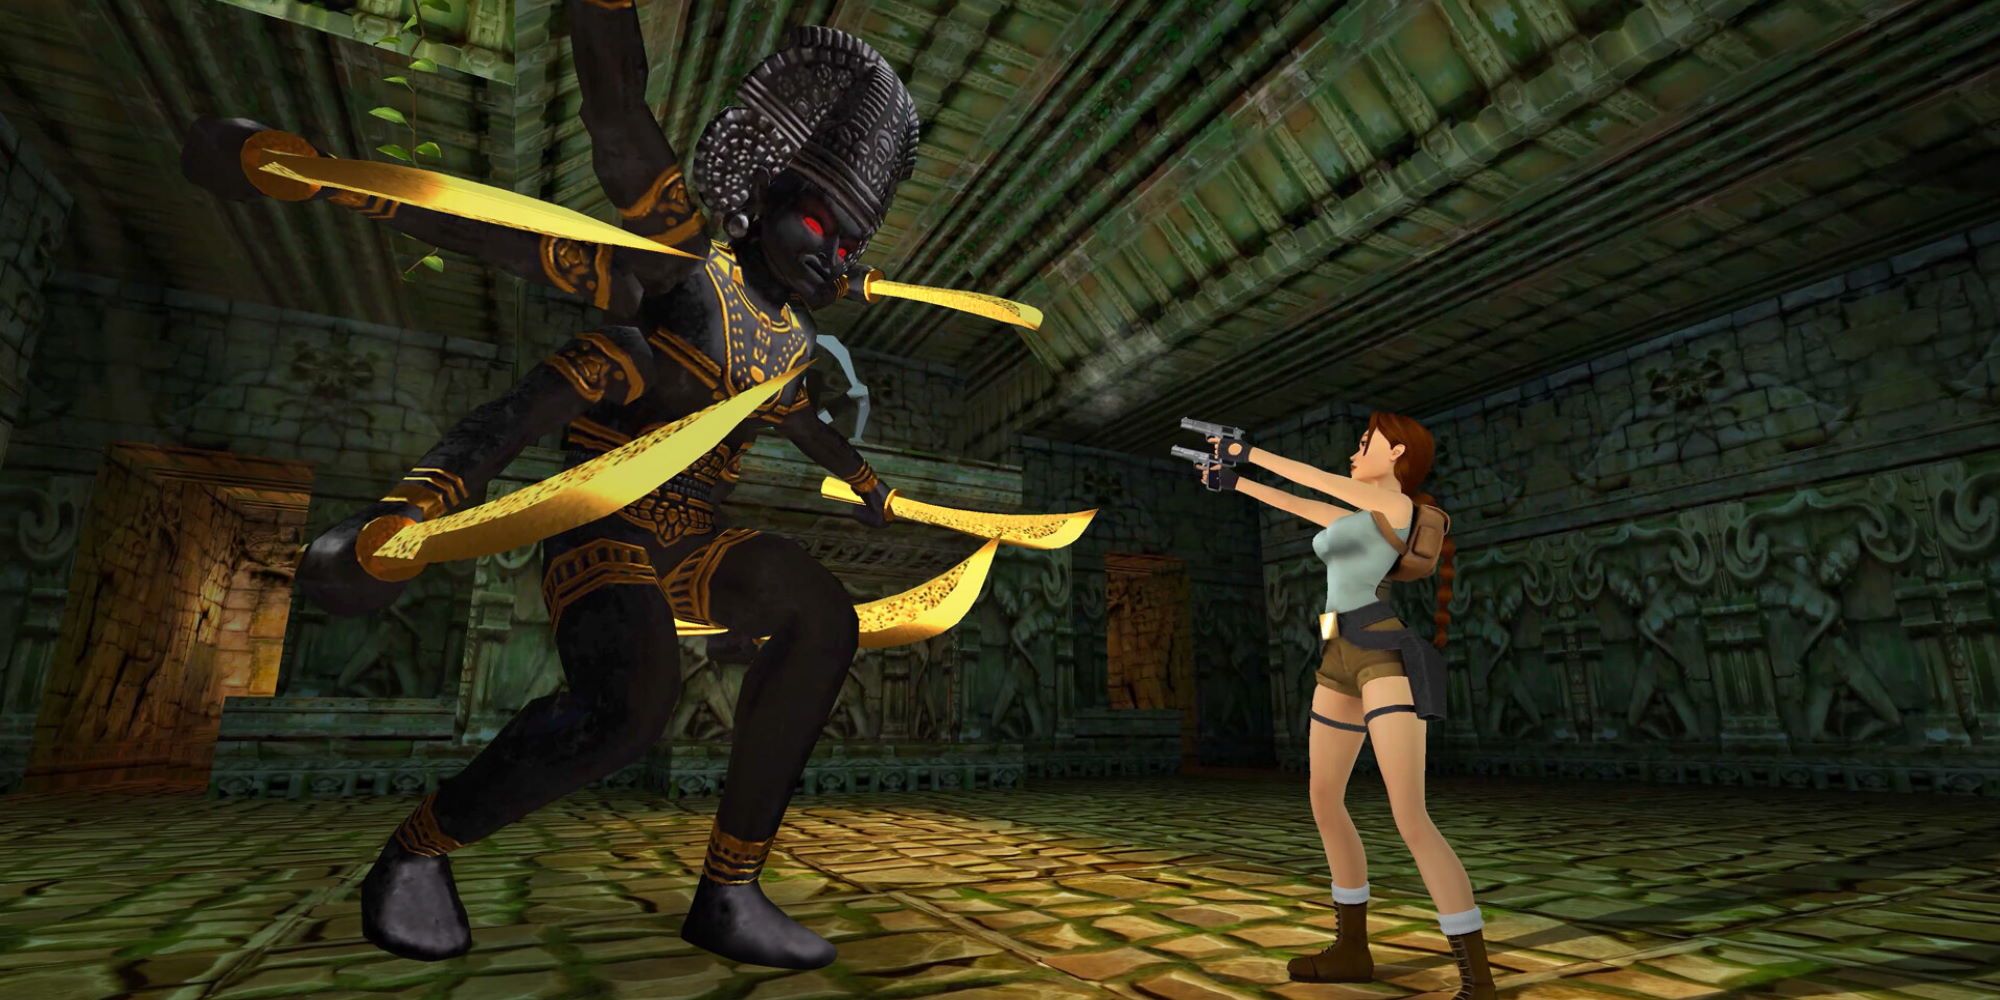 Lara Croft aiming her guns at a Sword Enemy inside an Indian temple